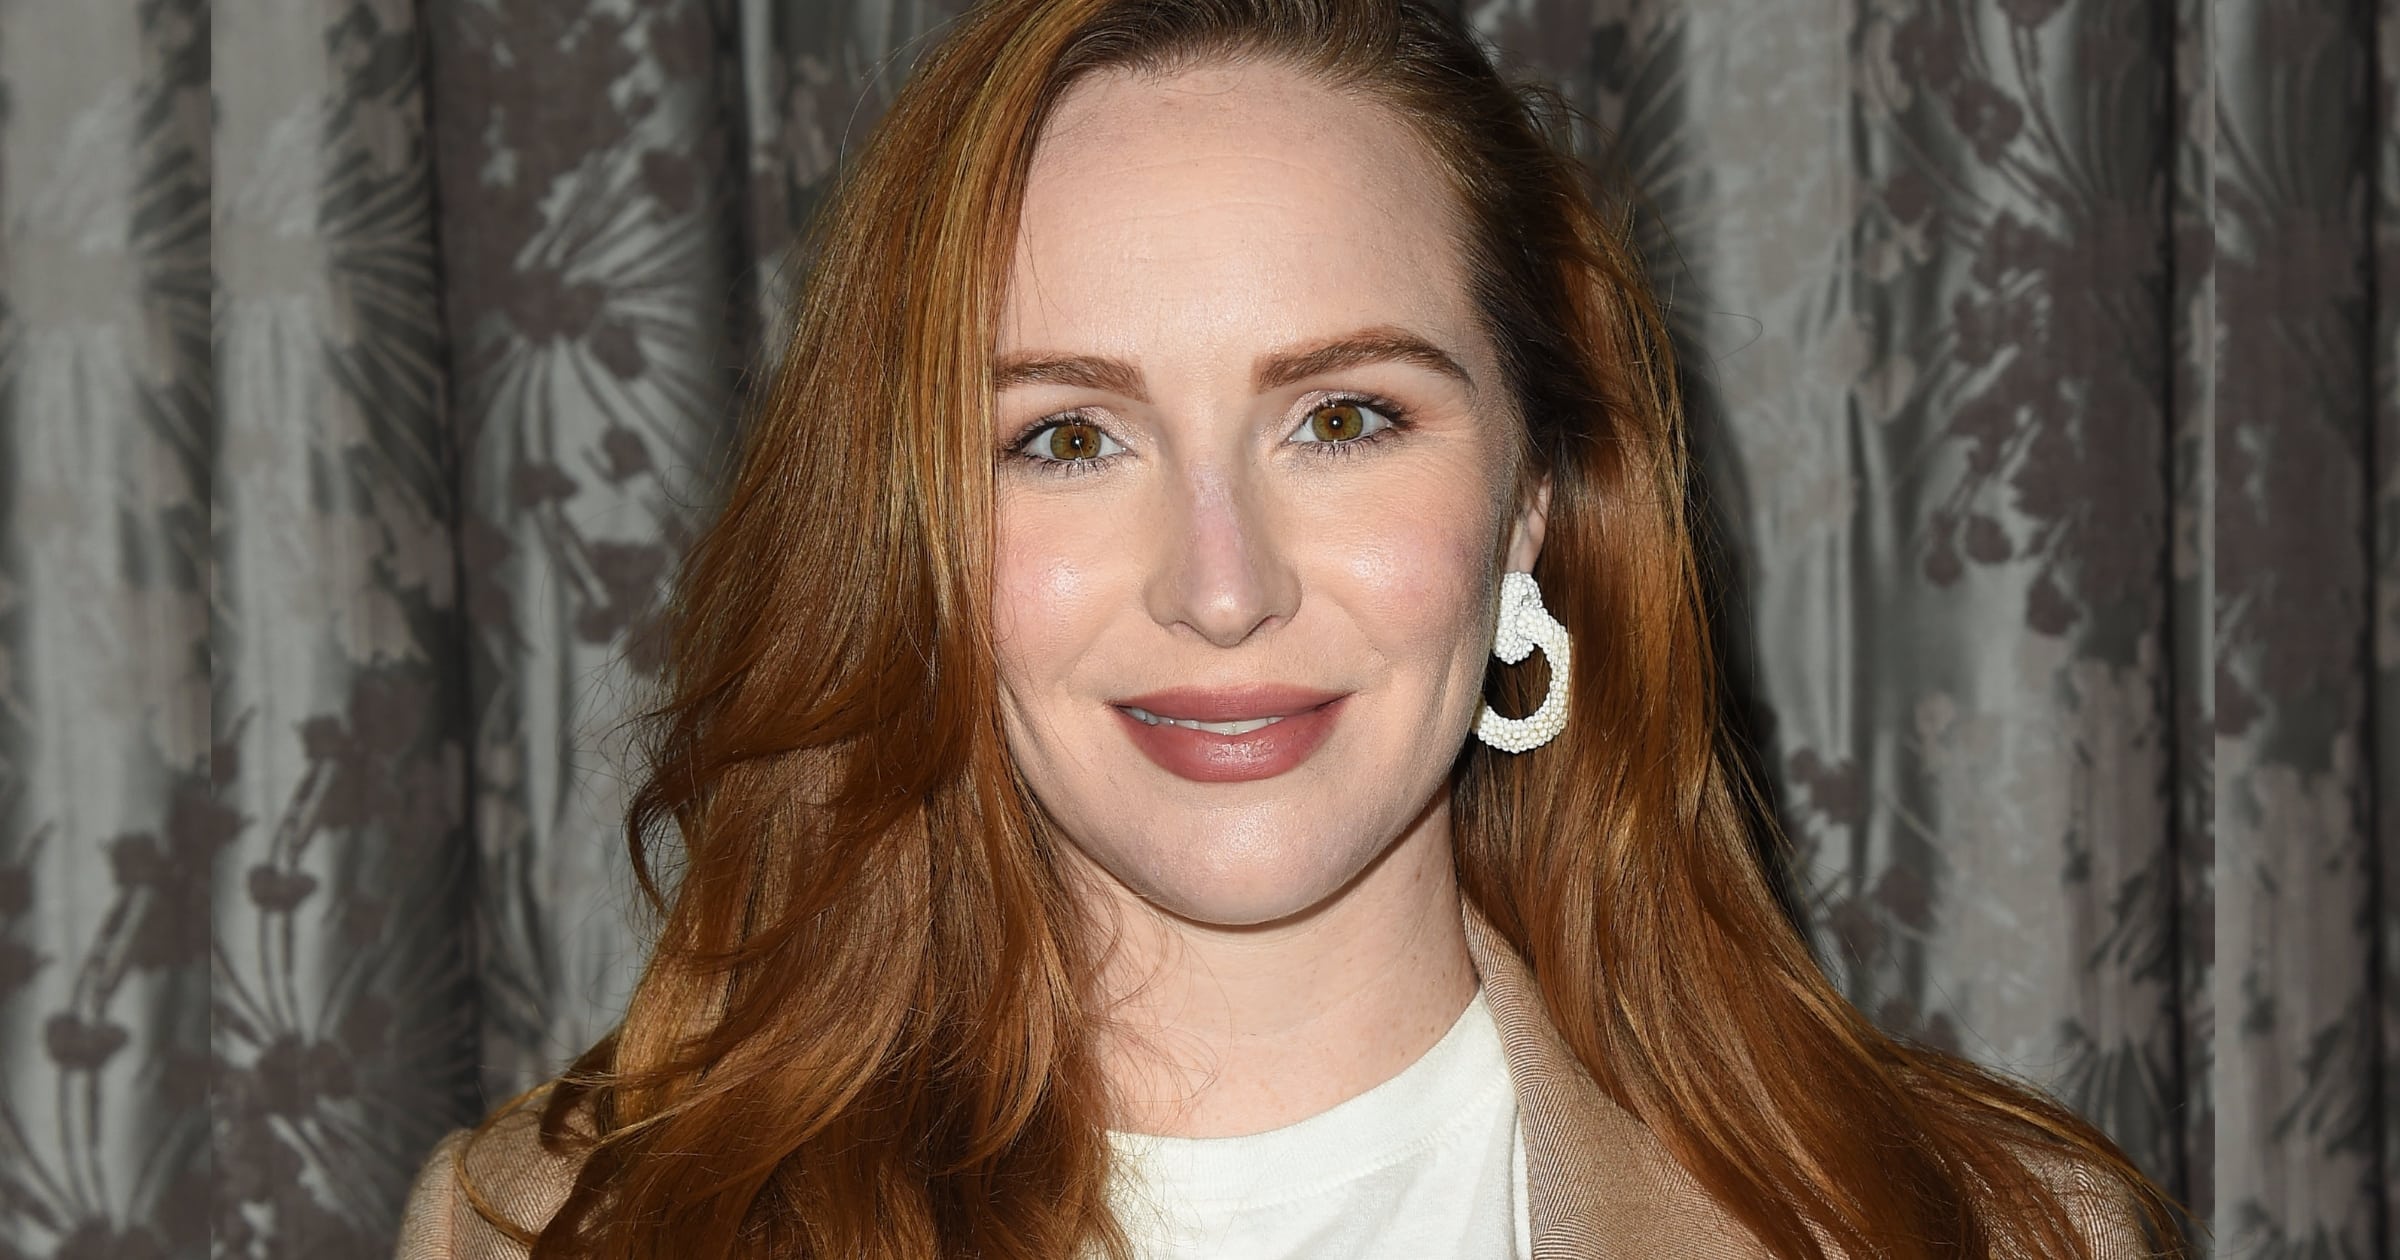 The Young and the Restless - Camryn Grimes